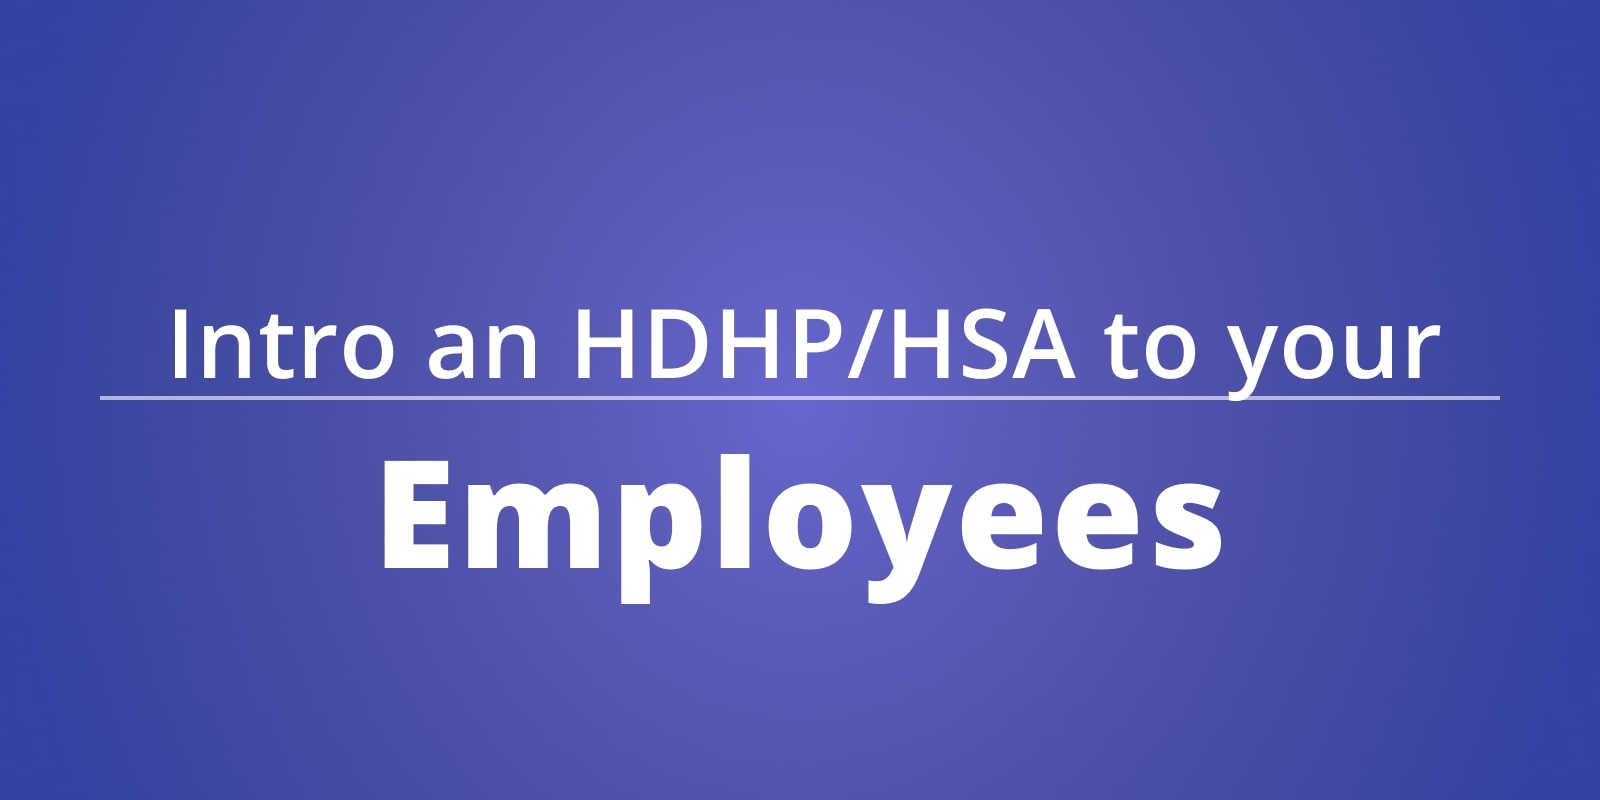 How to Introduce an HDHP/HSA to your Employees